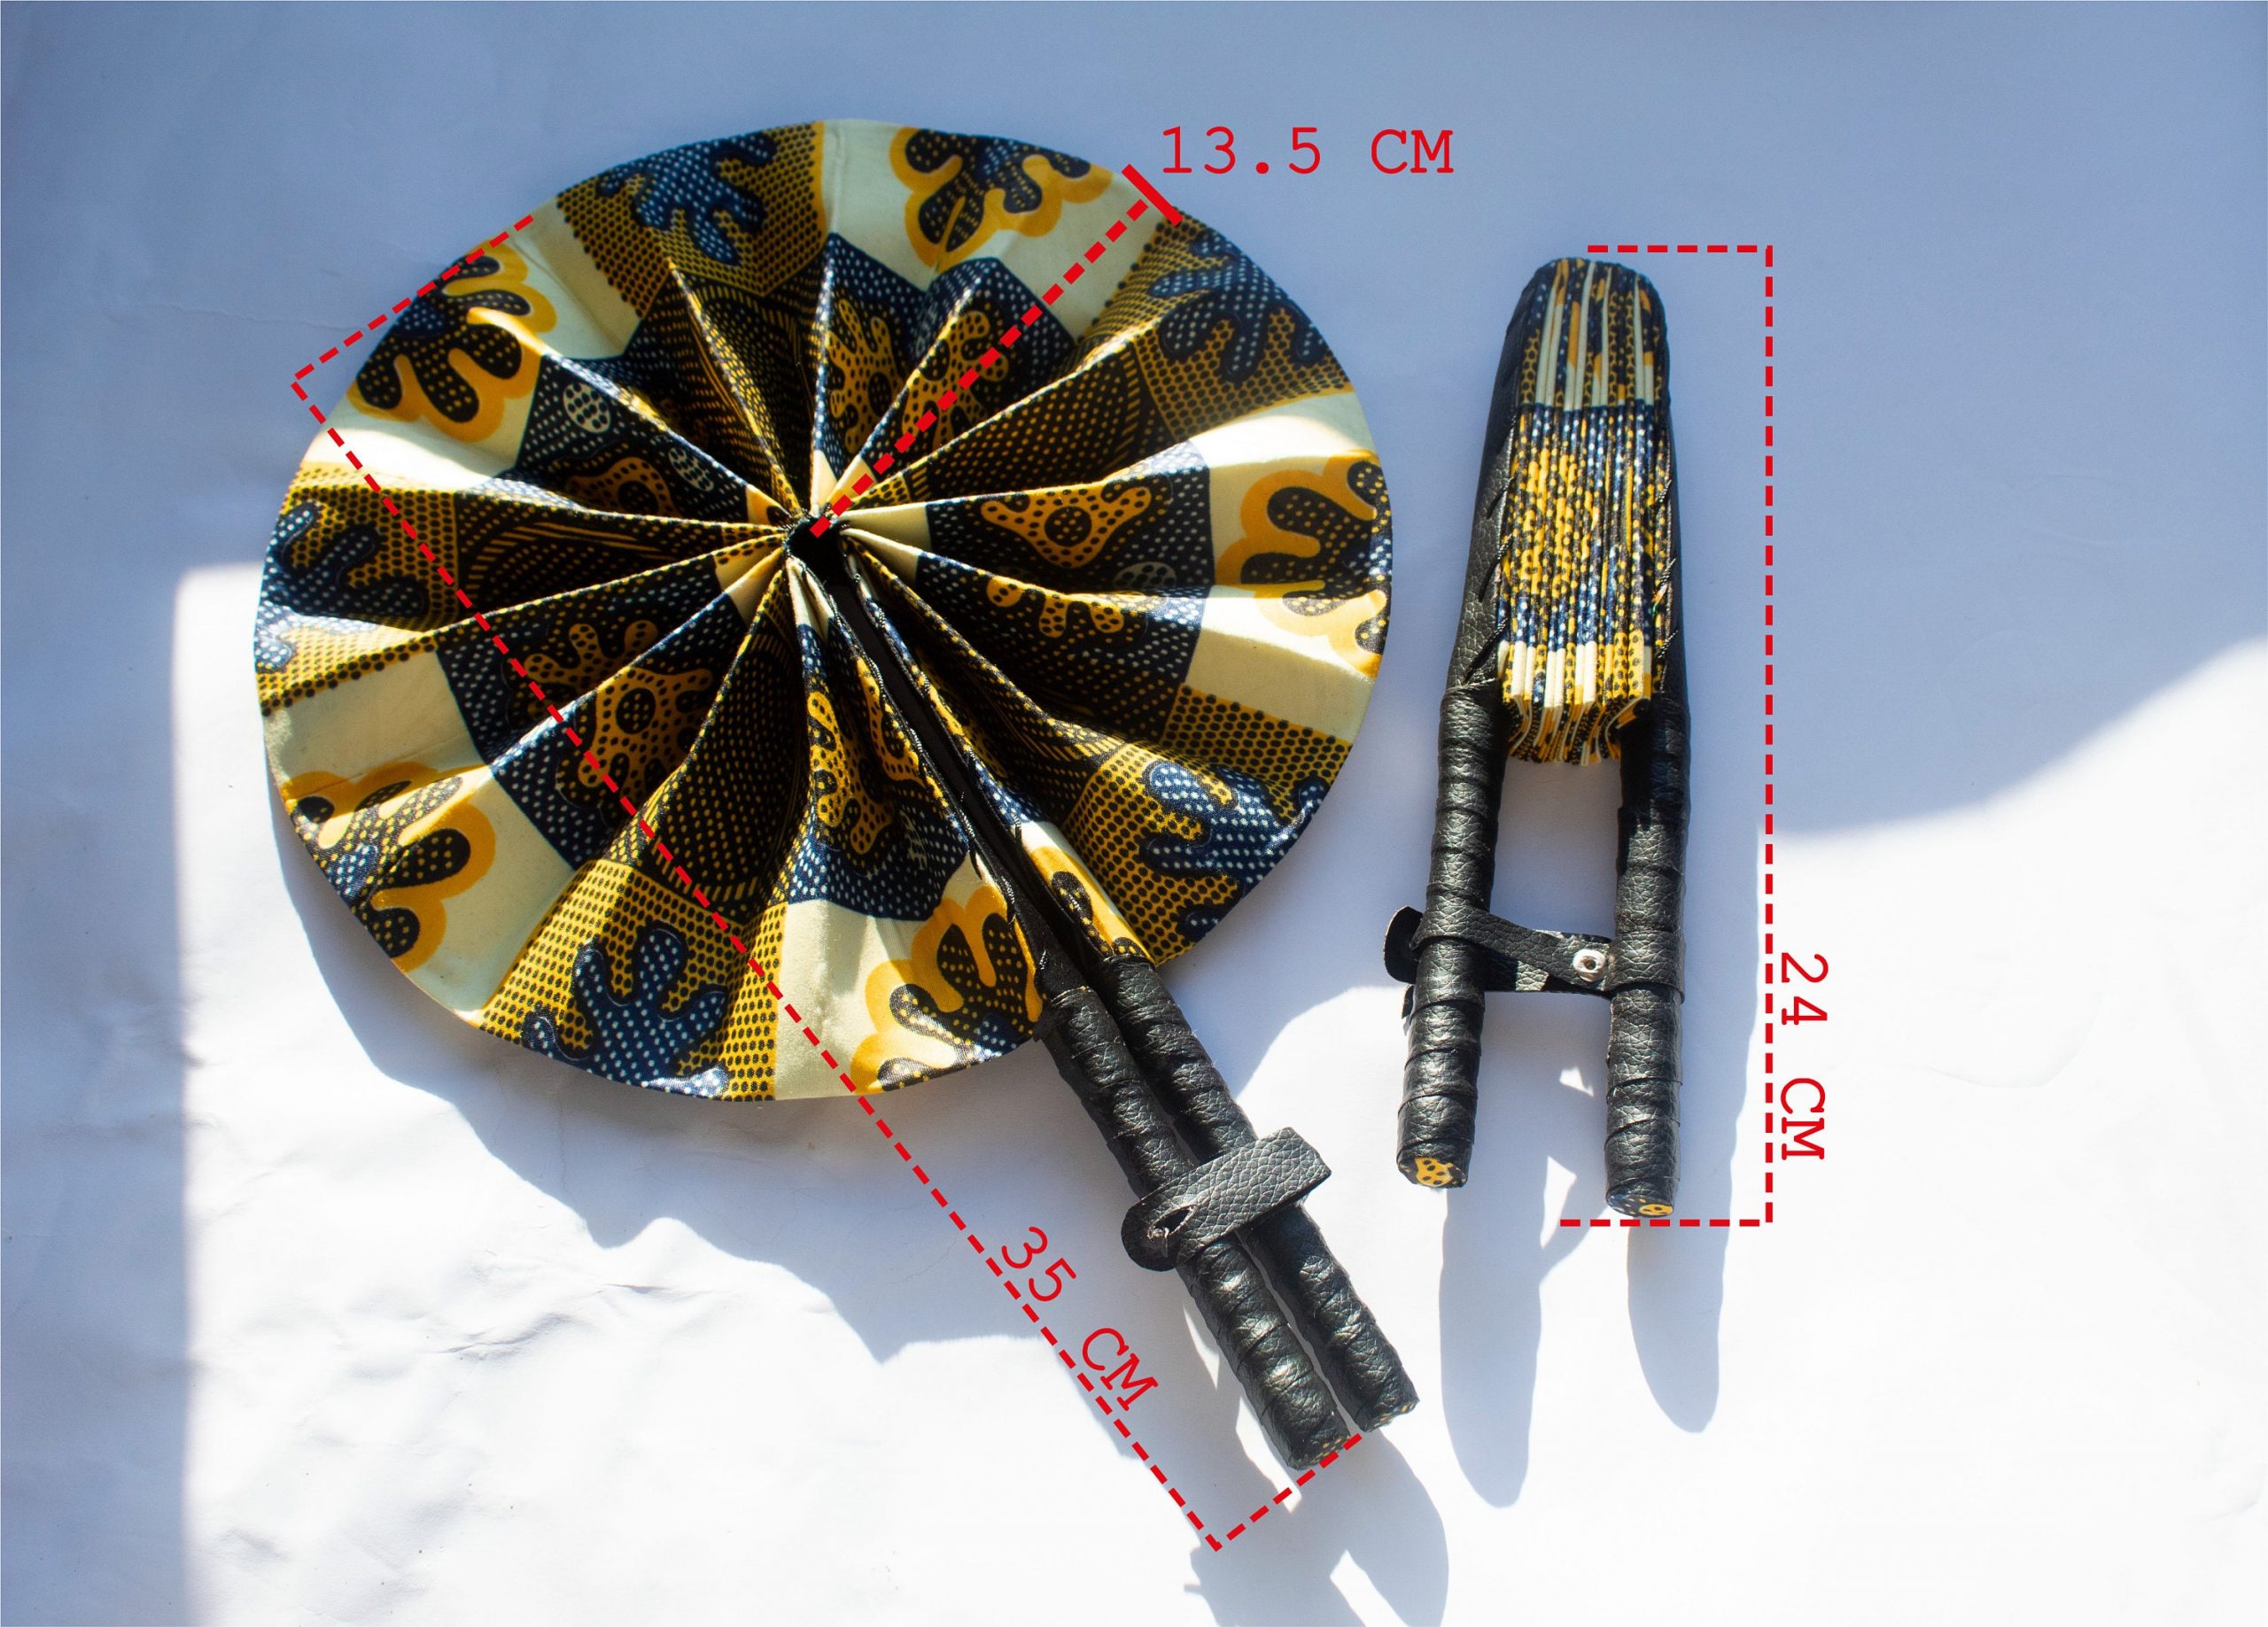 Golden Hand Fan, wakuda, african print fans, black-owned brands, black pound day